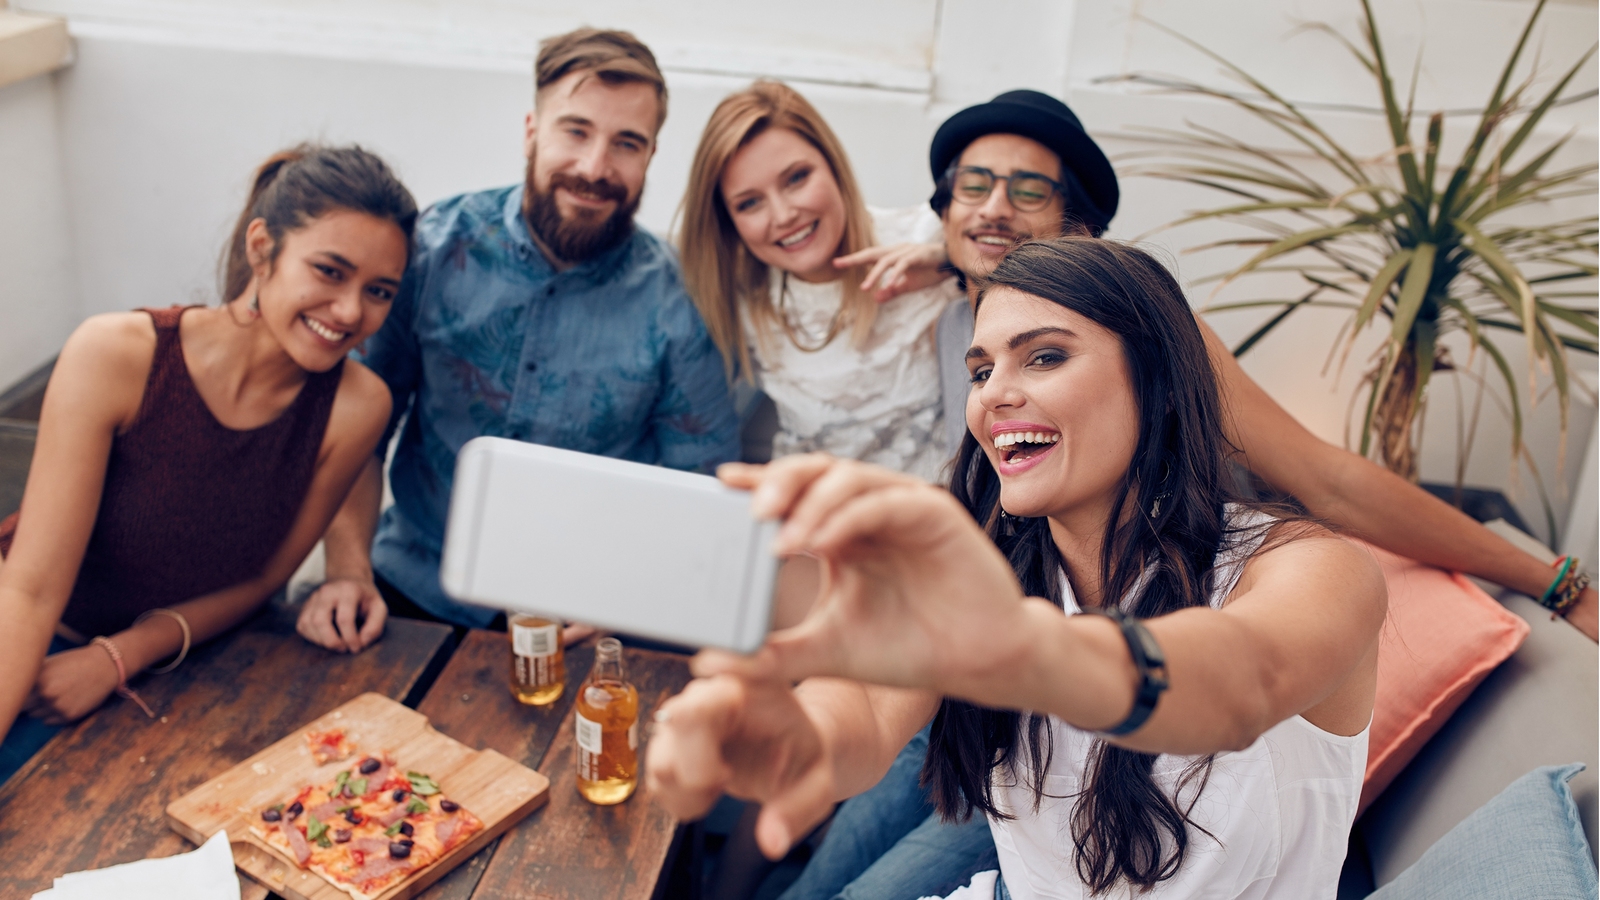 What Period in History Do You Actually Belong In? Group Of Friends Taking Selfie On A Smart Phone